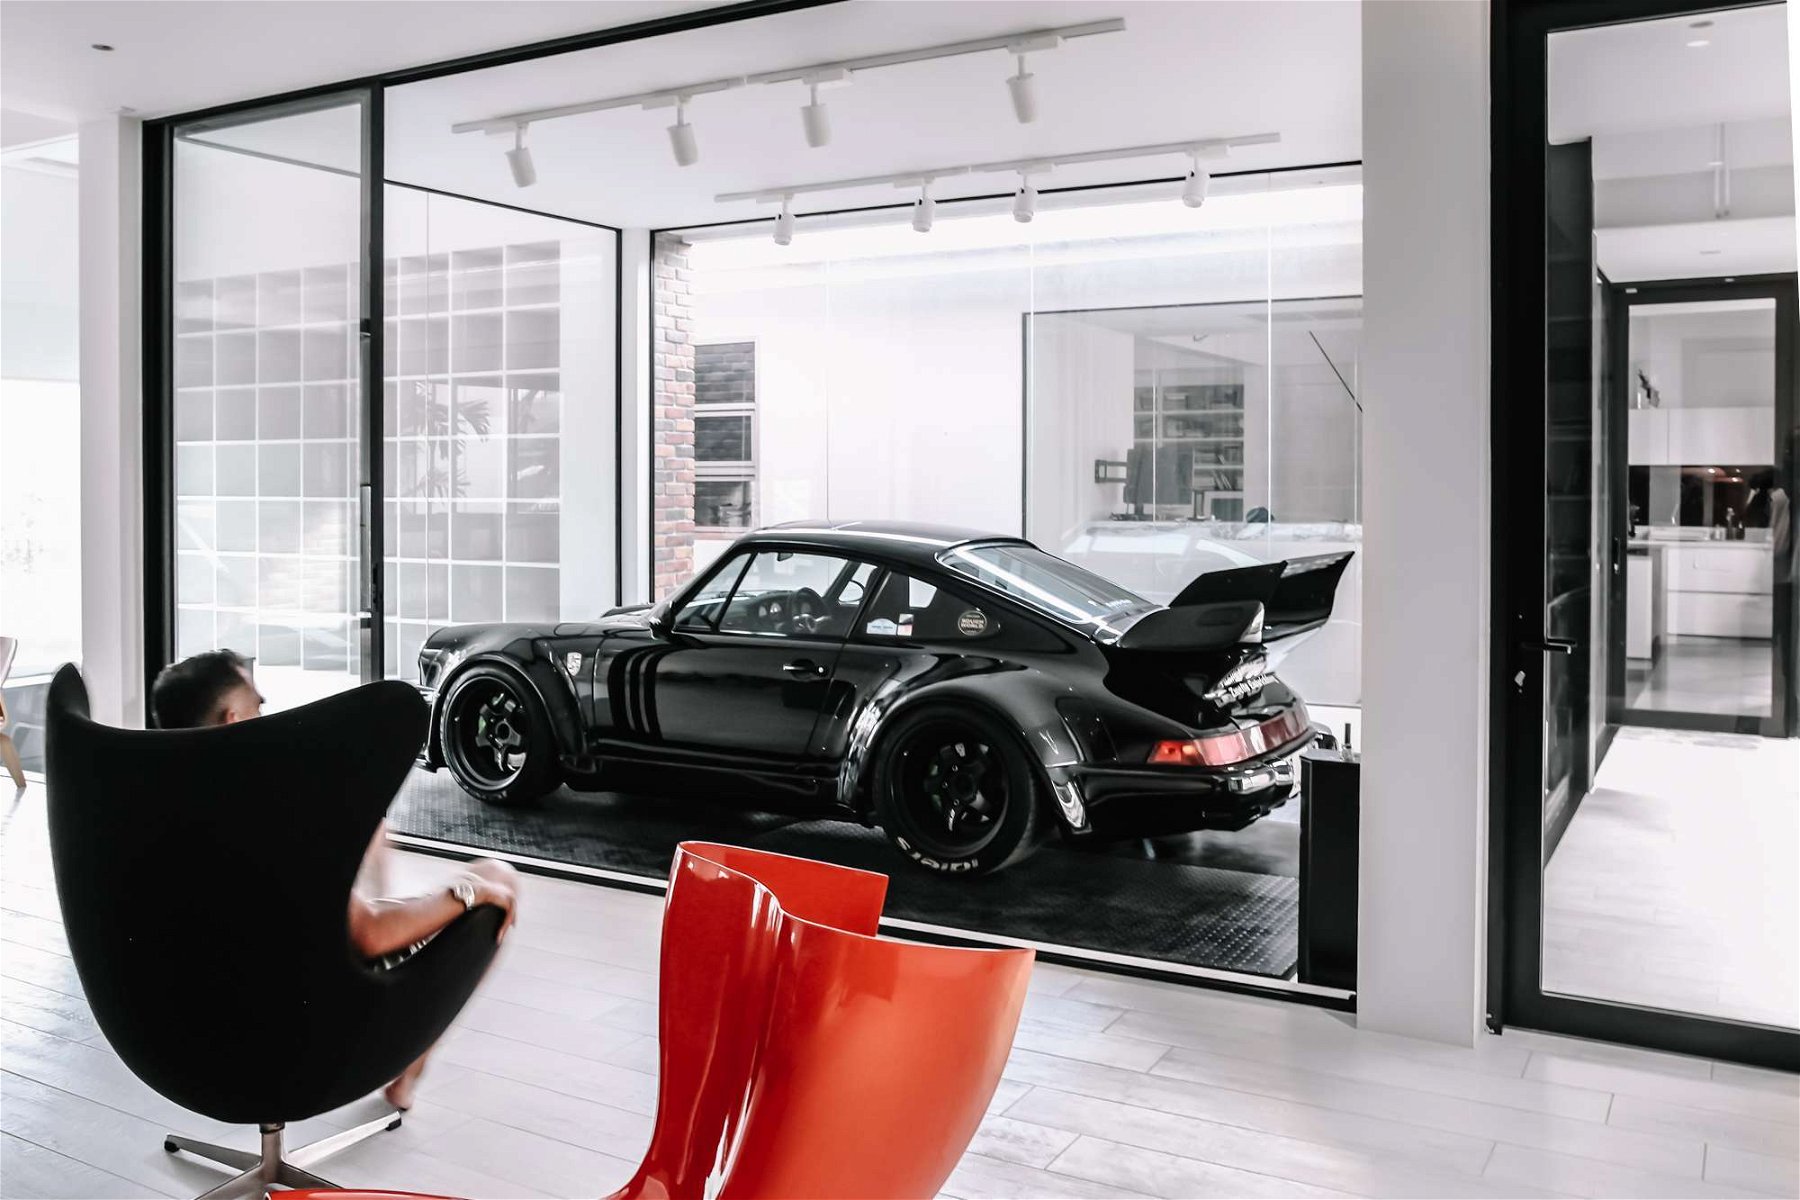 The Ultimate Dream Dwelling of Every Car Lover